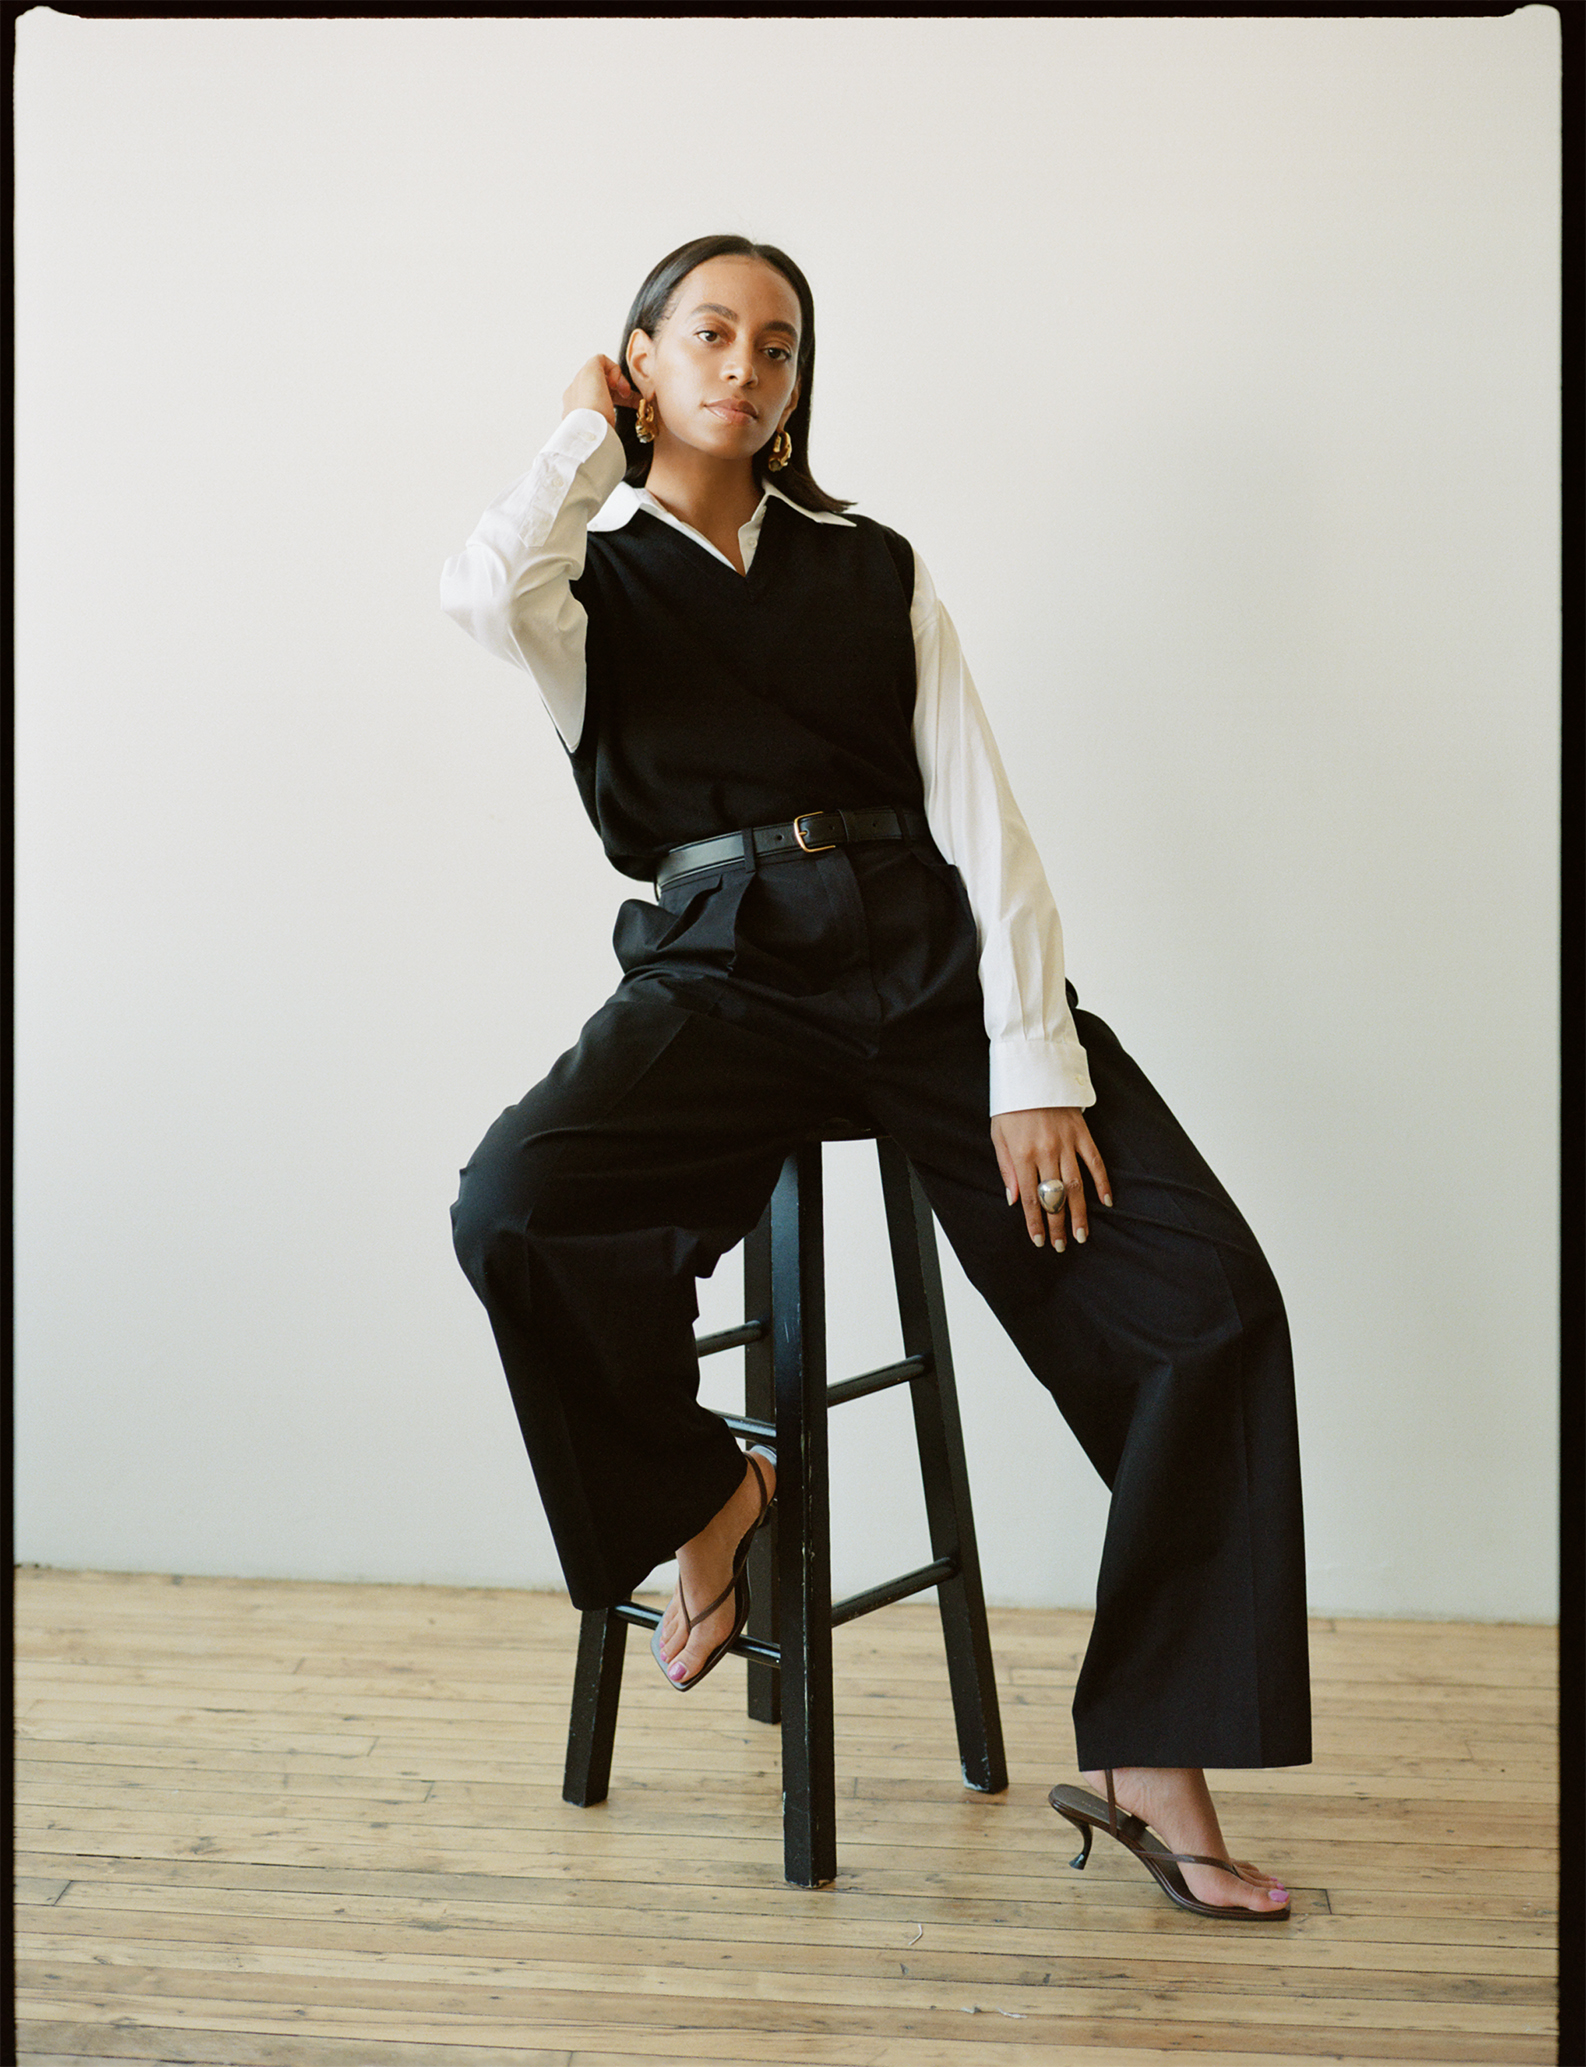 Solange Knowles Partners With The 2021 Woolmark Prize On 'Passage'